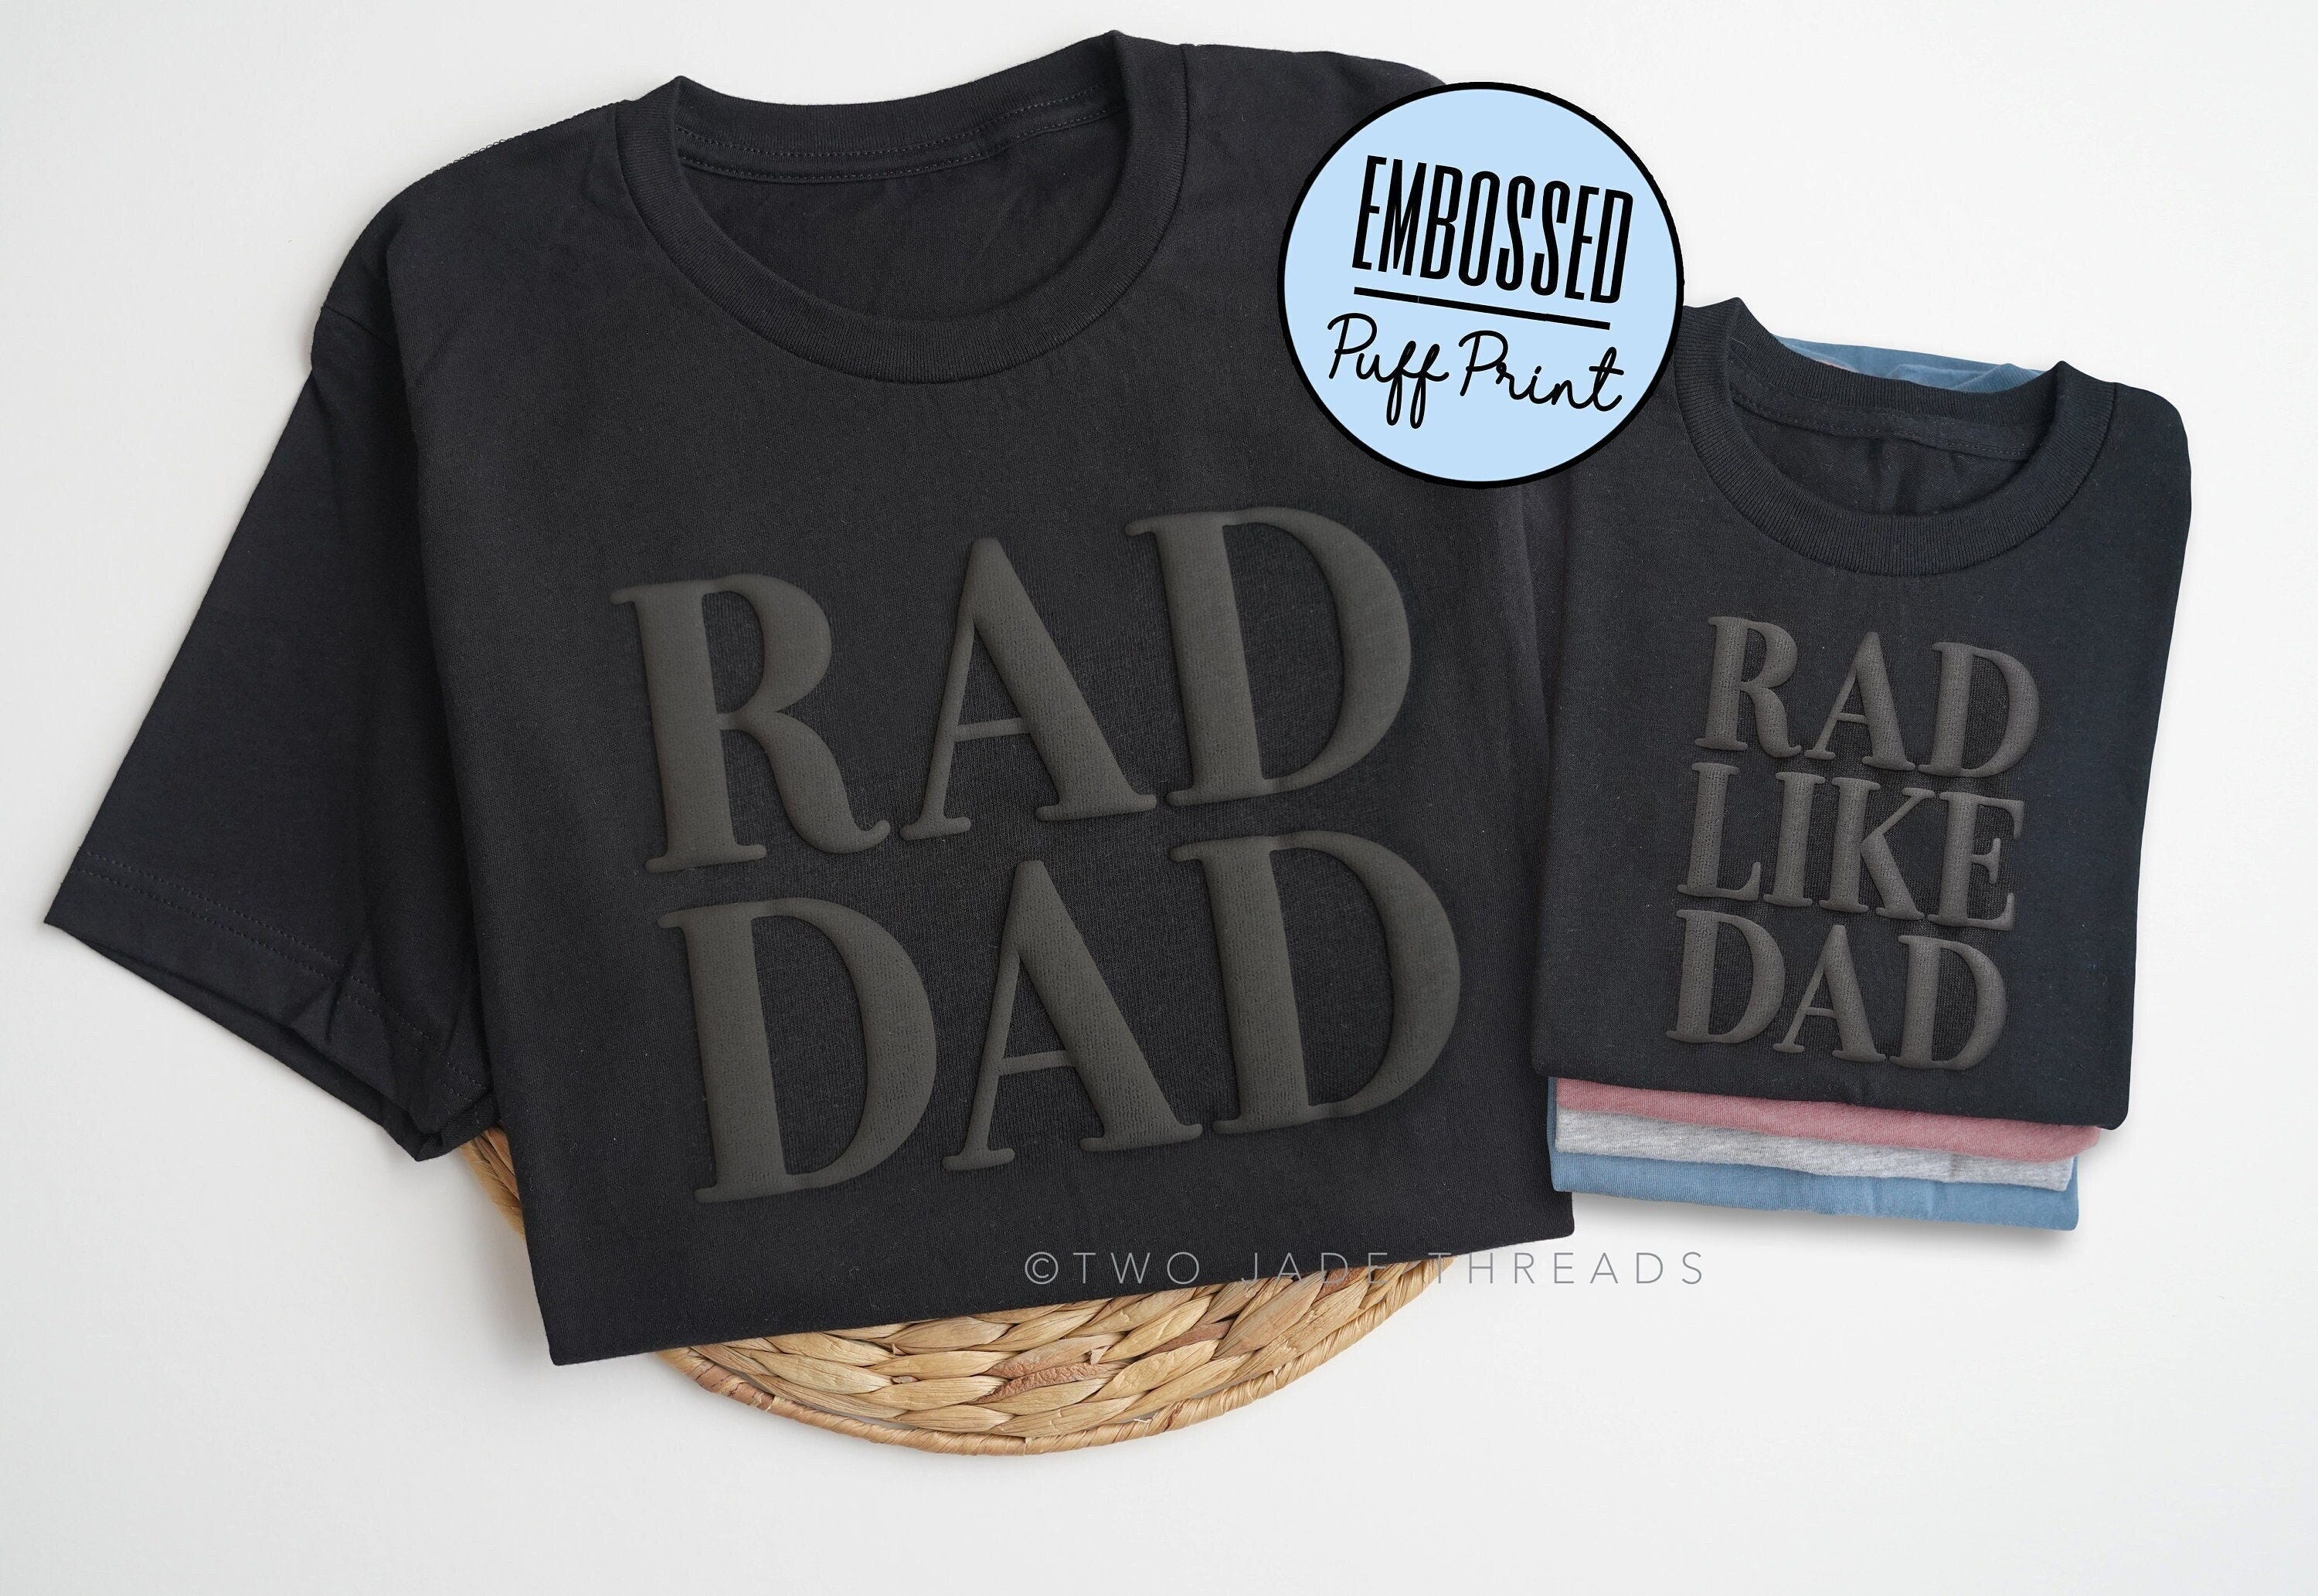 Embossed Puff Dad and Kids Matching Shirts, Rad Dad Shirt, Rad Like Dad Shirt, Daddy and Me Matching, Fathers Day Gift for Dad, Dad and Son